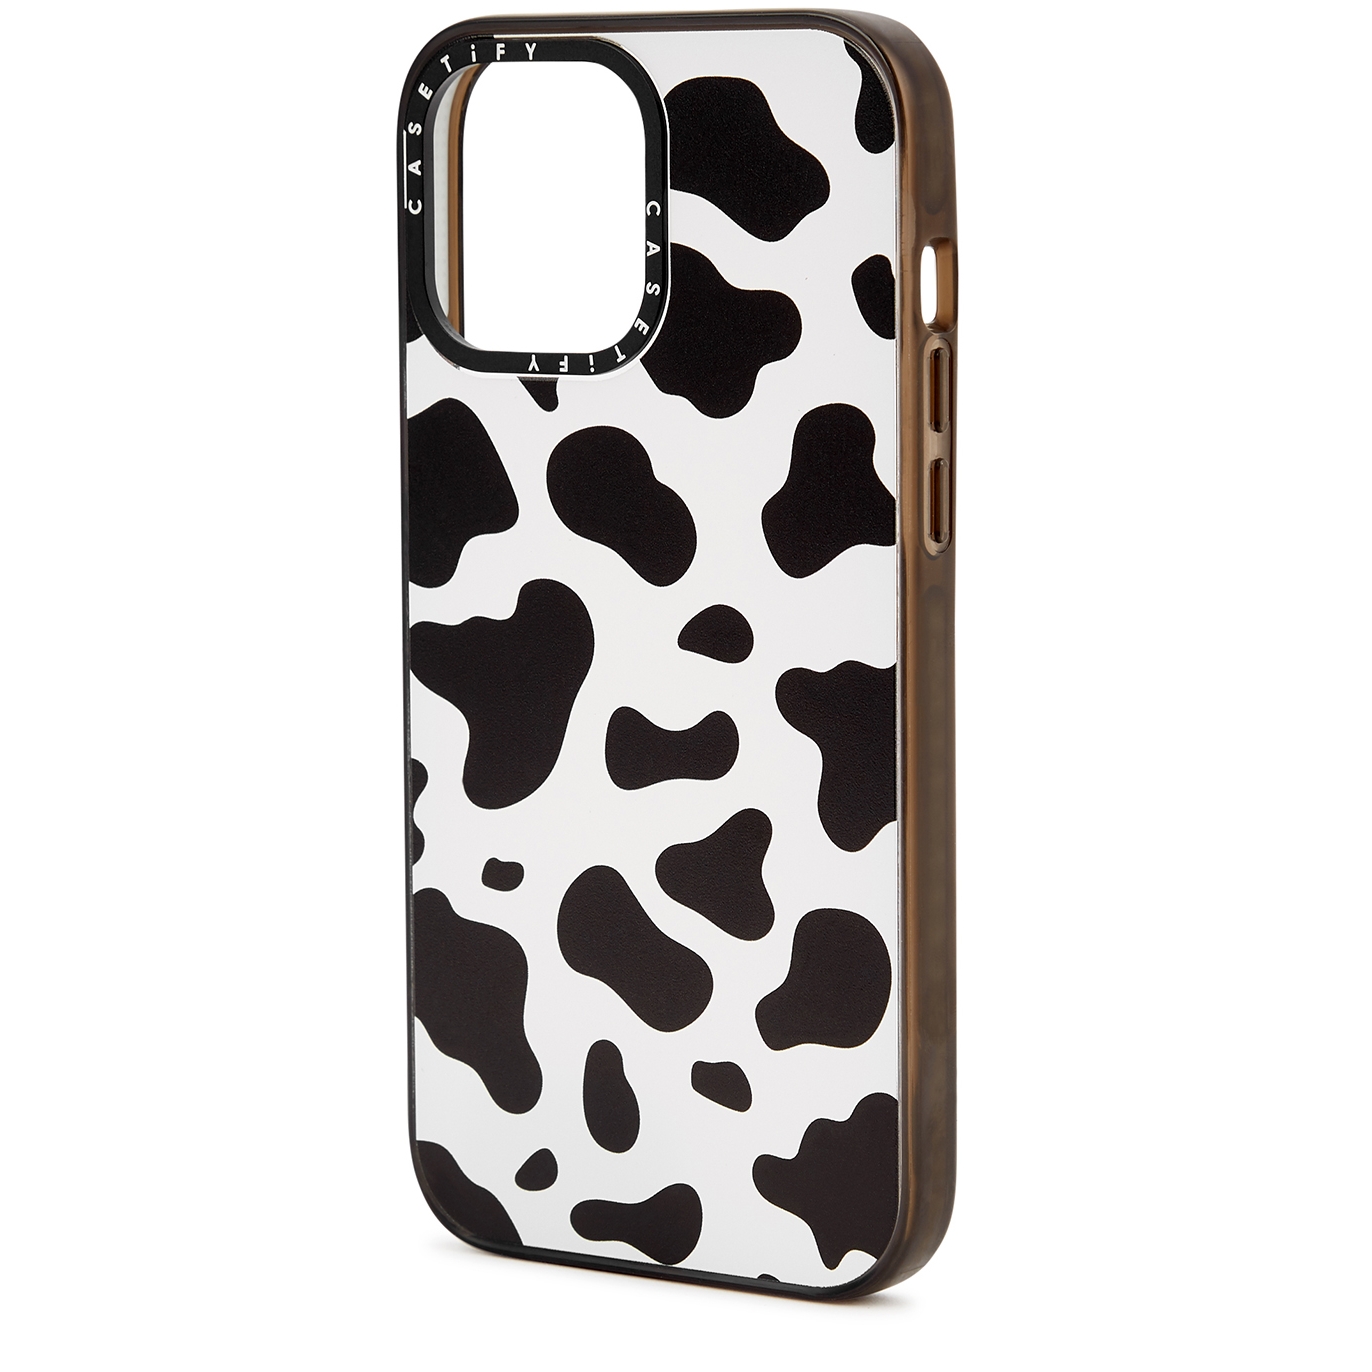 CASETiFY Cow-print IPhone 13 Pro Max Case - Black And White